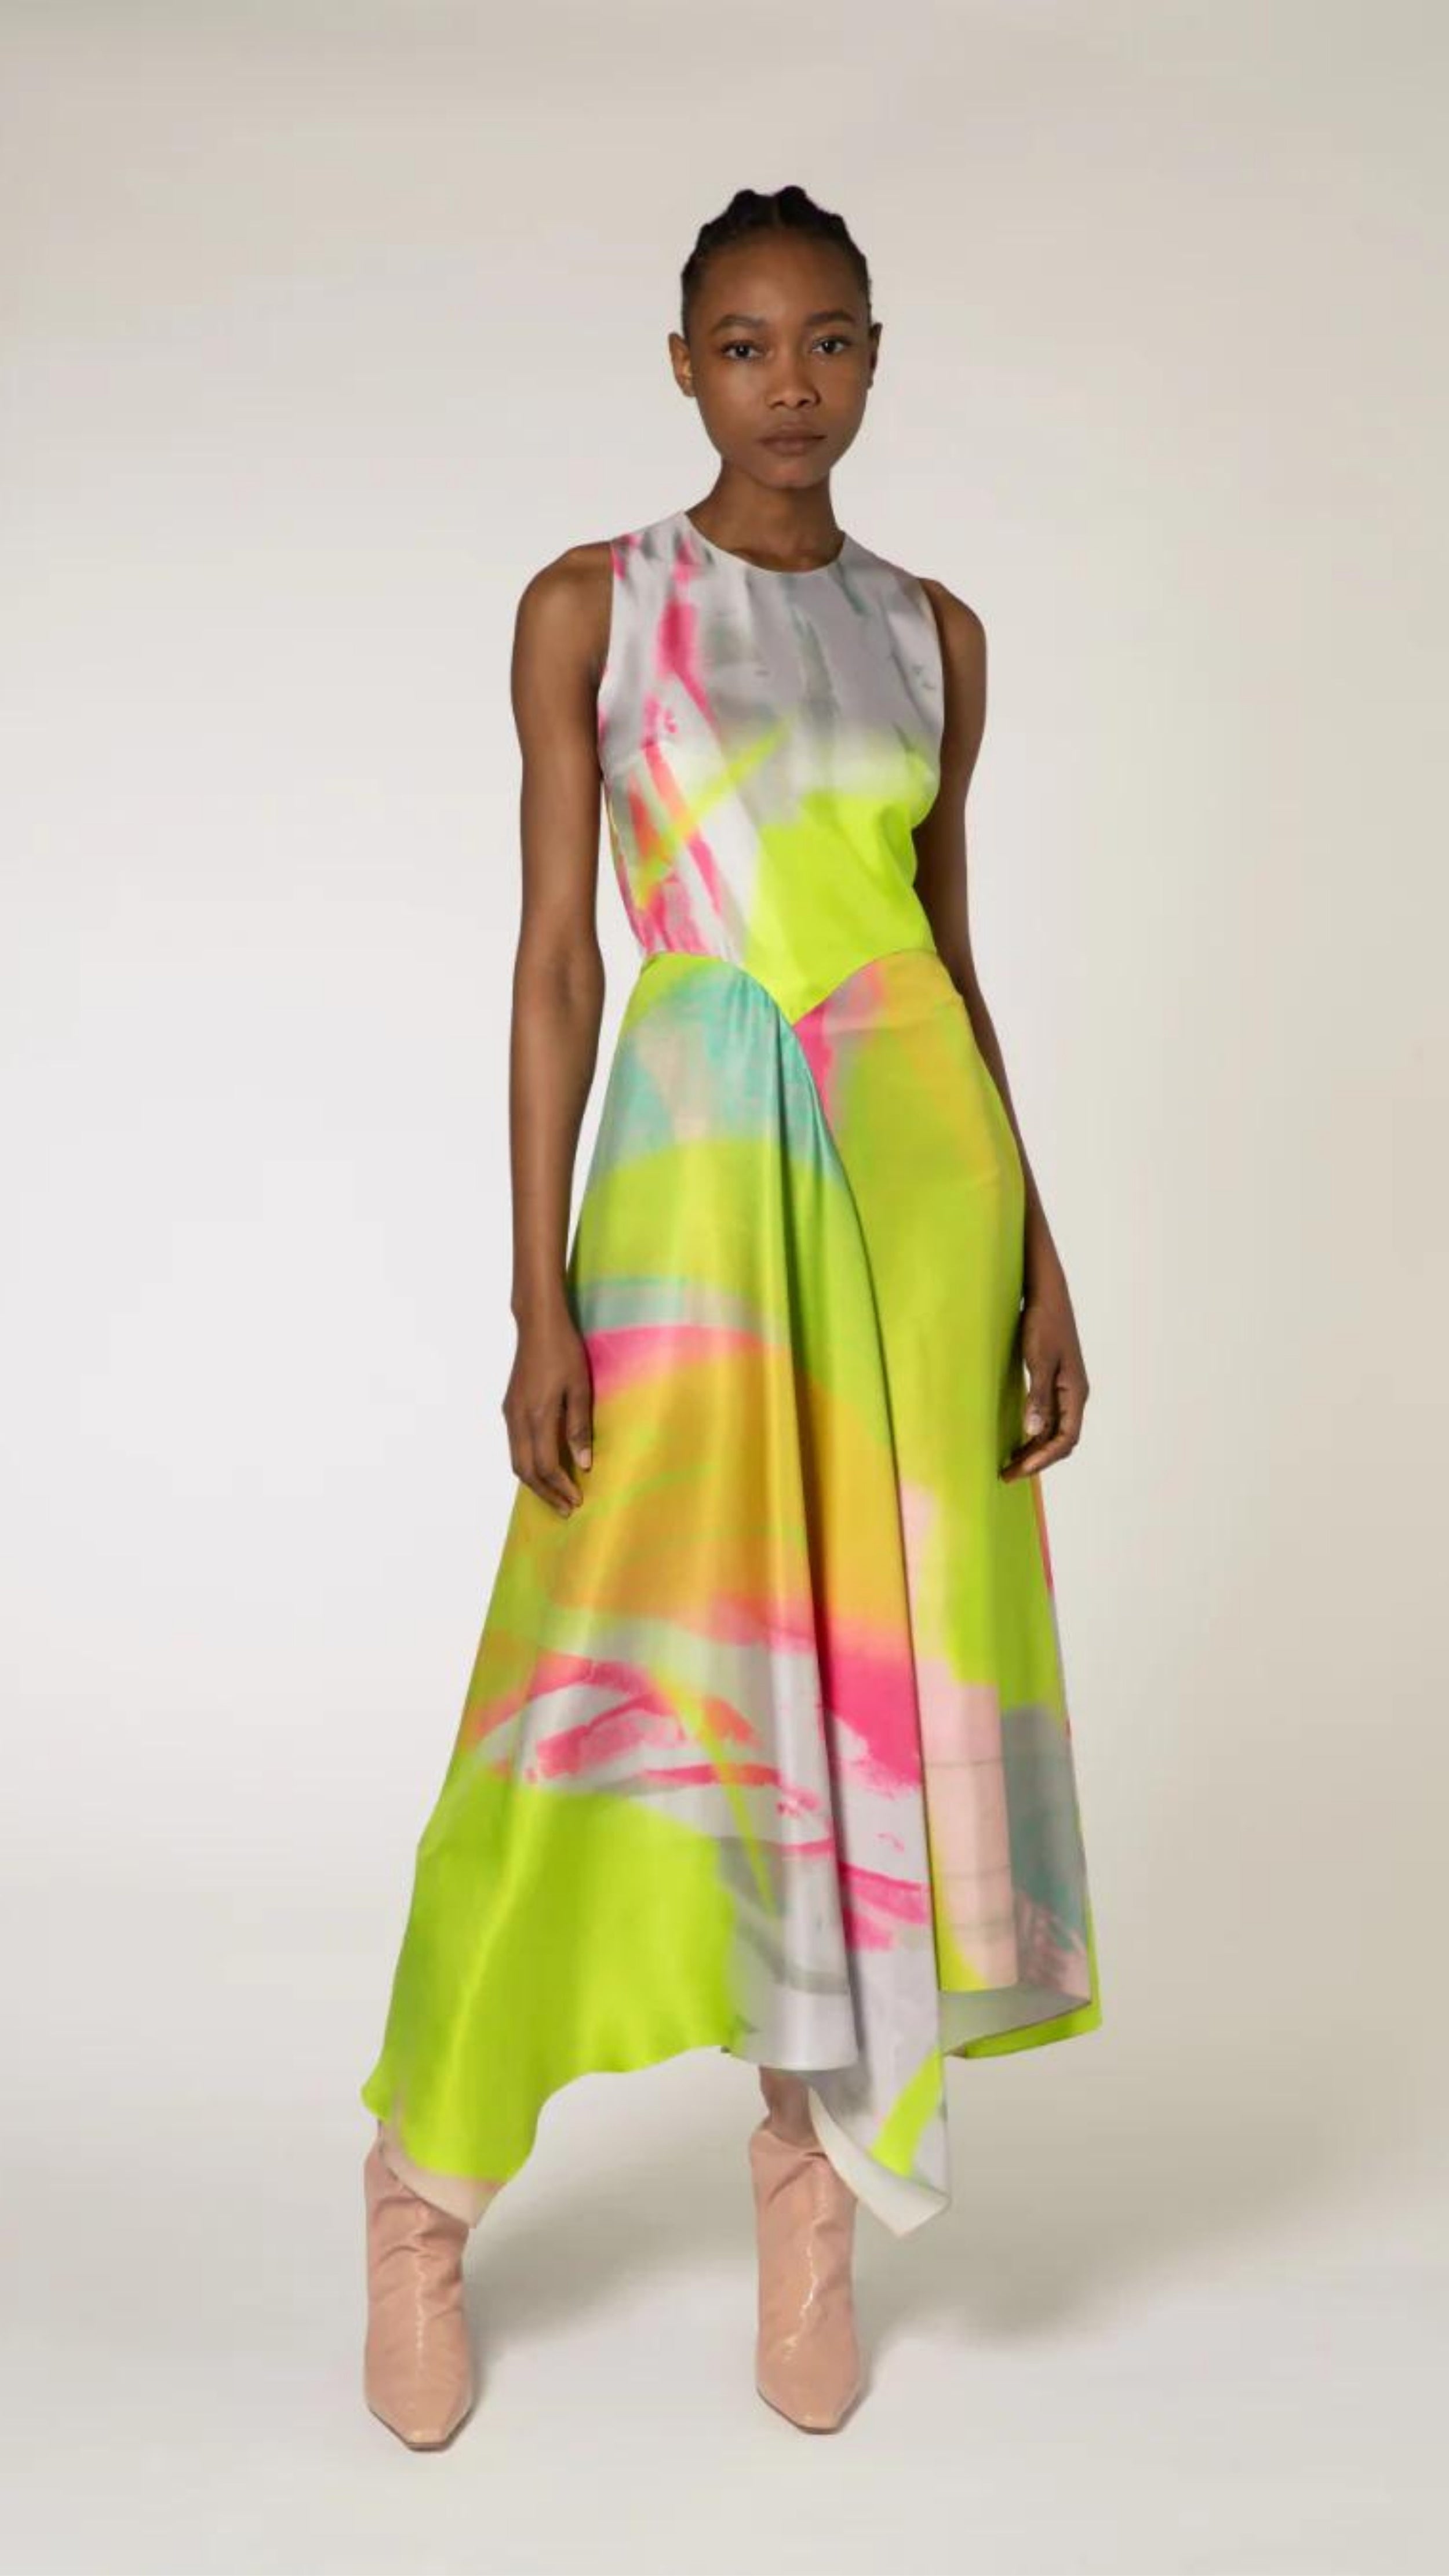 Roksanda Zenobia Dress. Fresh modern style silk twill dress in neon limes, pinks and soft blue. With an racer back style top, asymetrical dropped waist and midi length loose fitting skirt. Shown on model facing front.